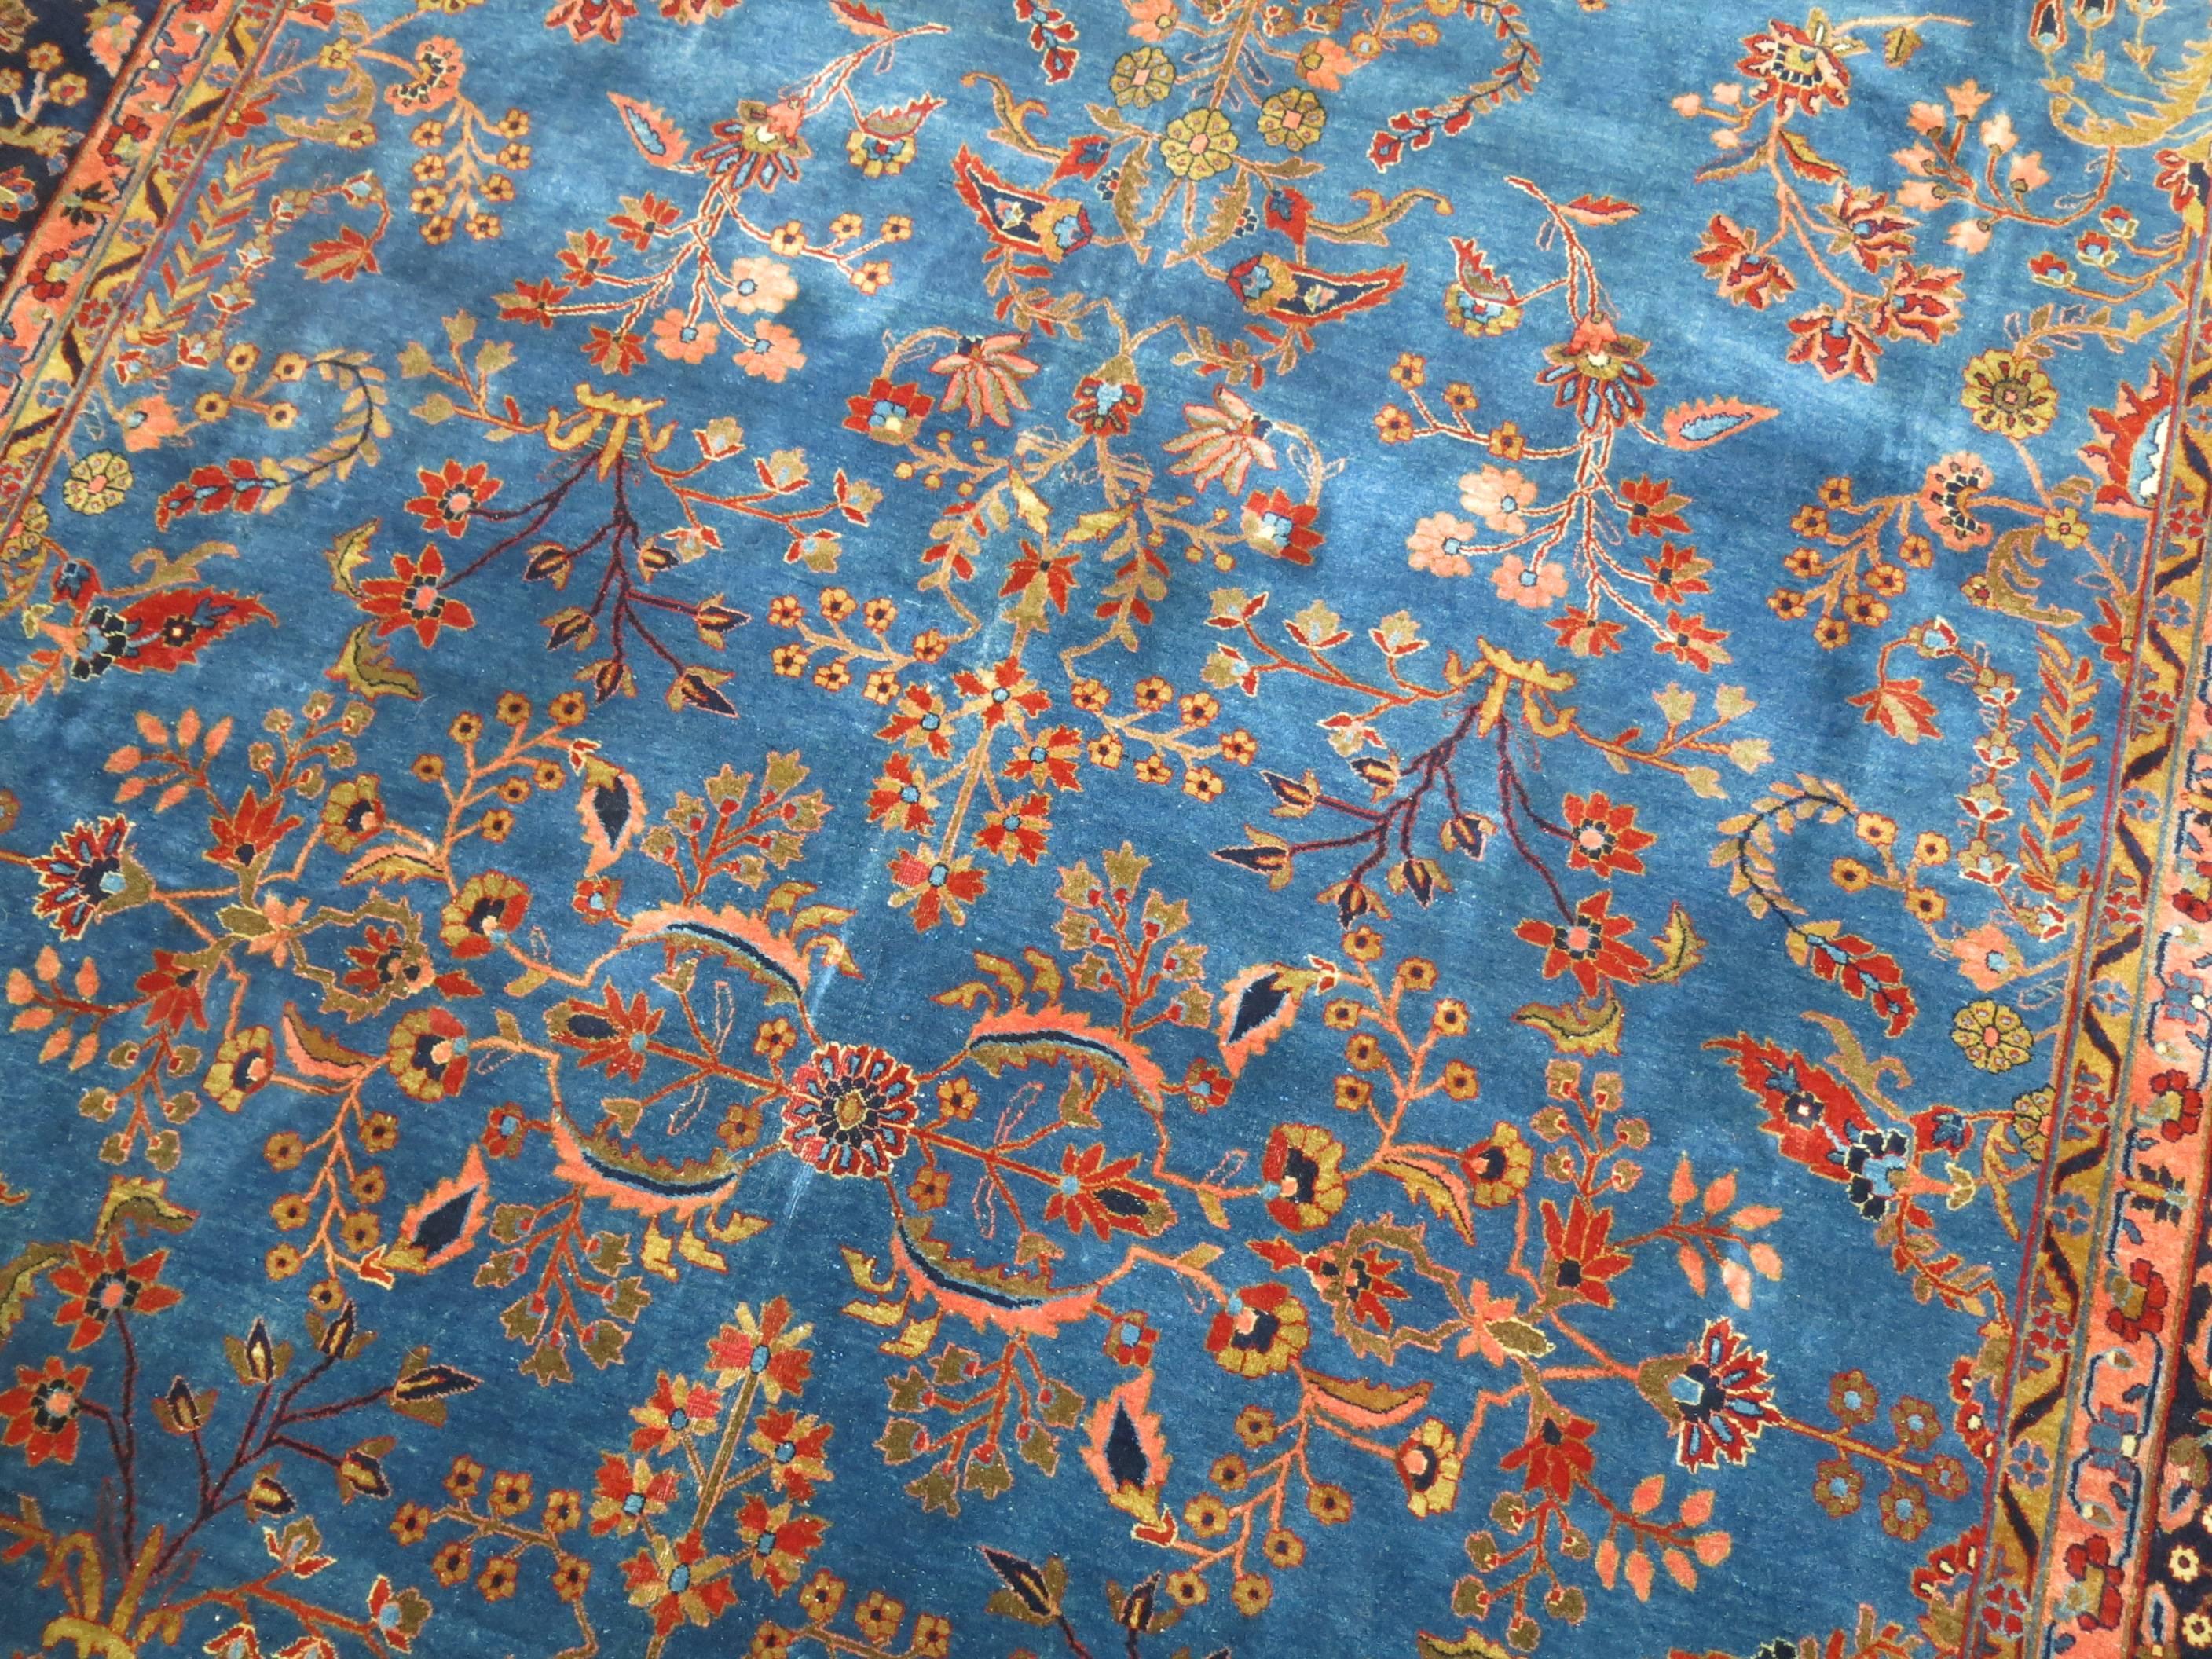 Hand-Woven Antique Manchester Kashan Rug in Blue Tones, Signed